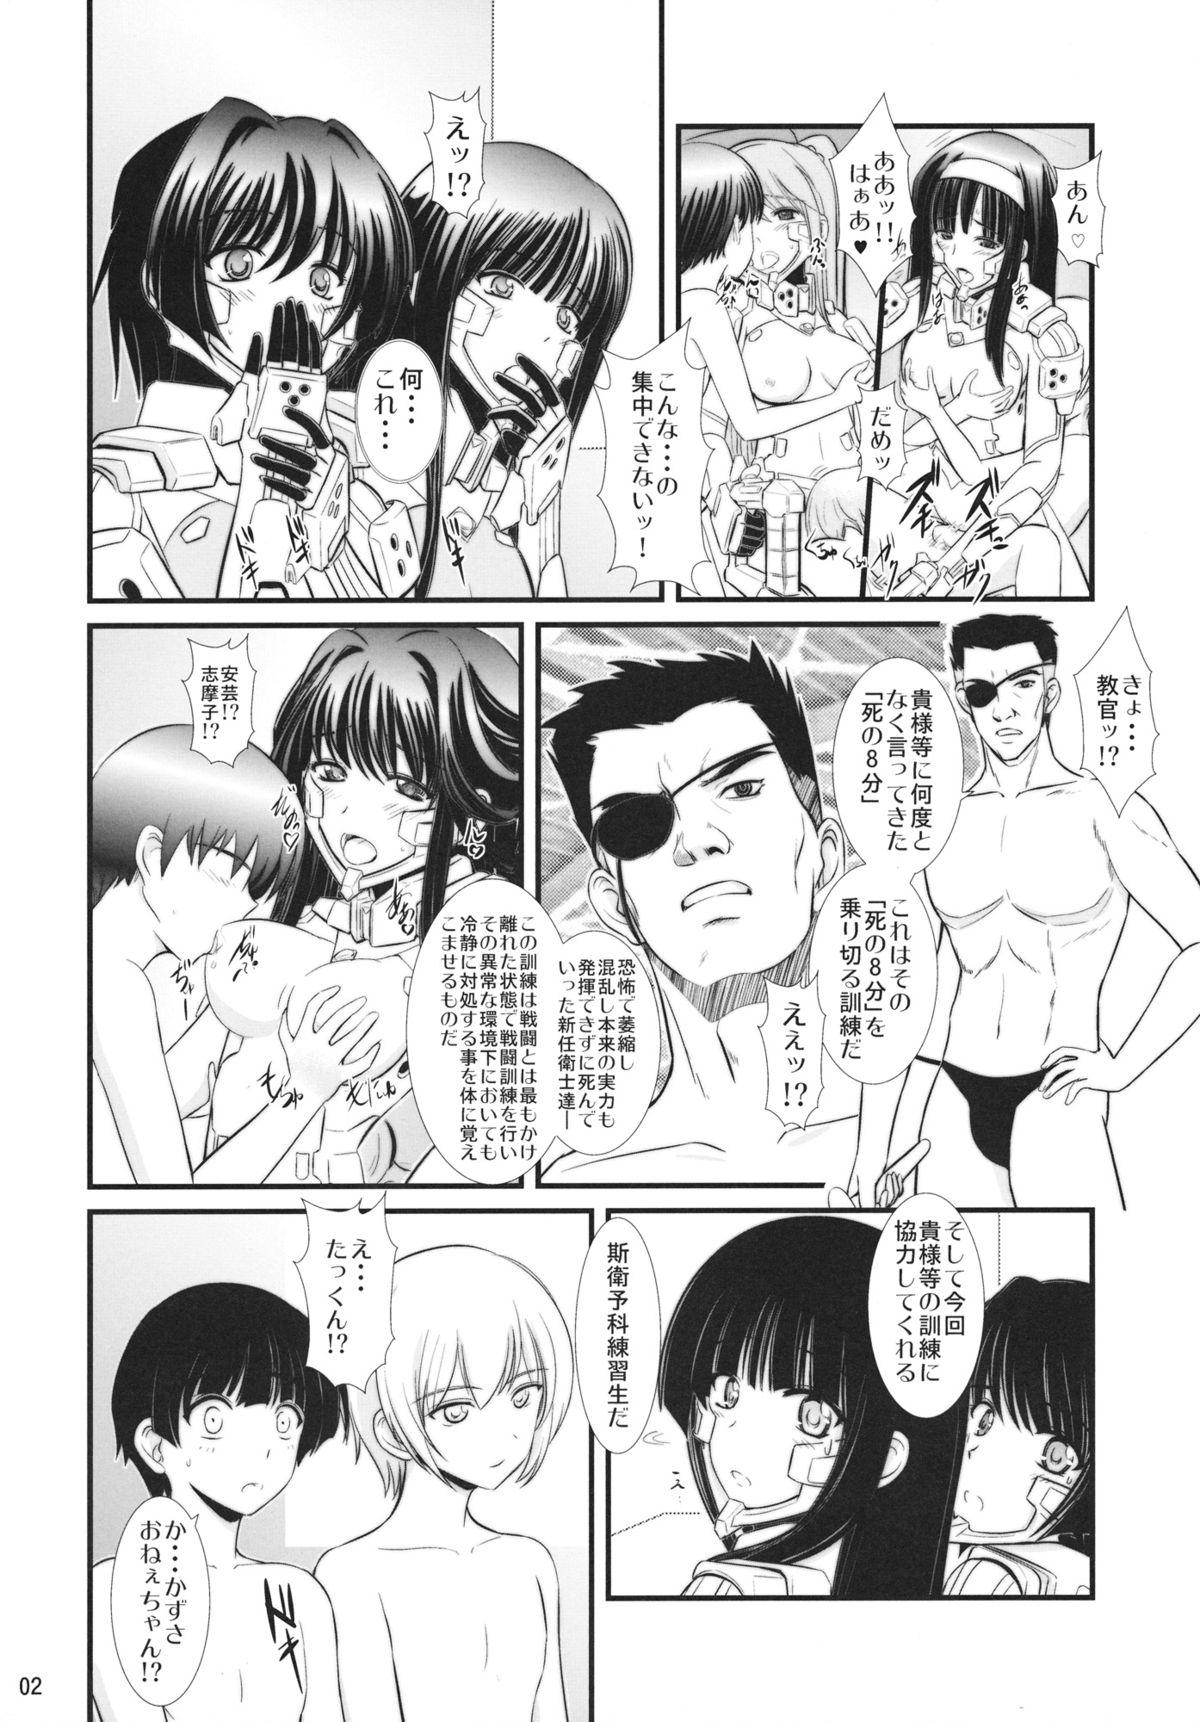 Punish 8 Minute - Muv-luv Muv-luv alternative total eclipse Sexy Girl Sex - Page 2